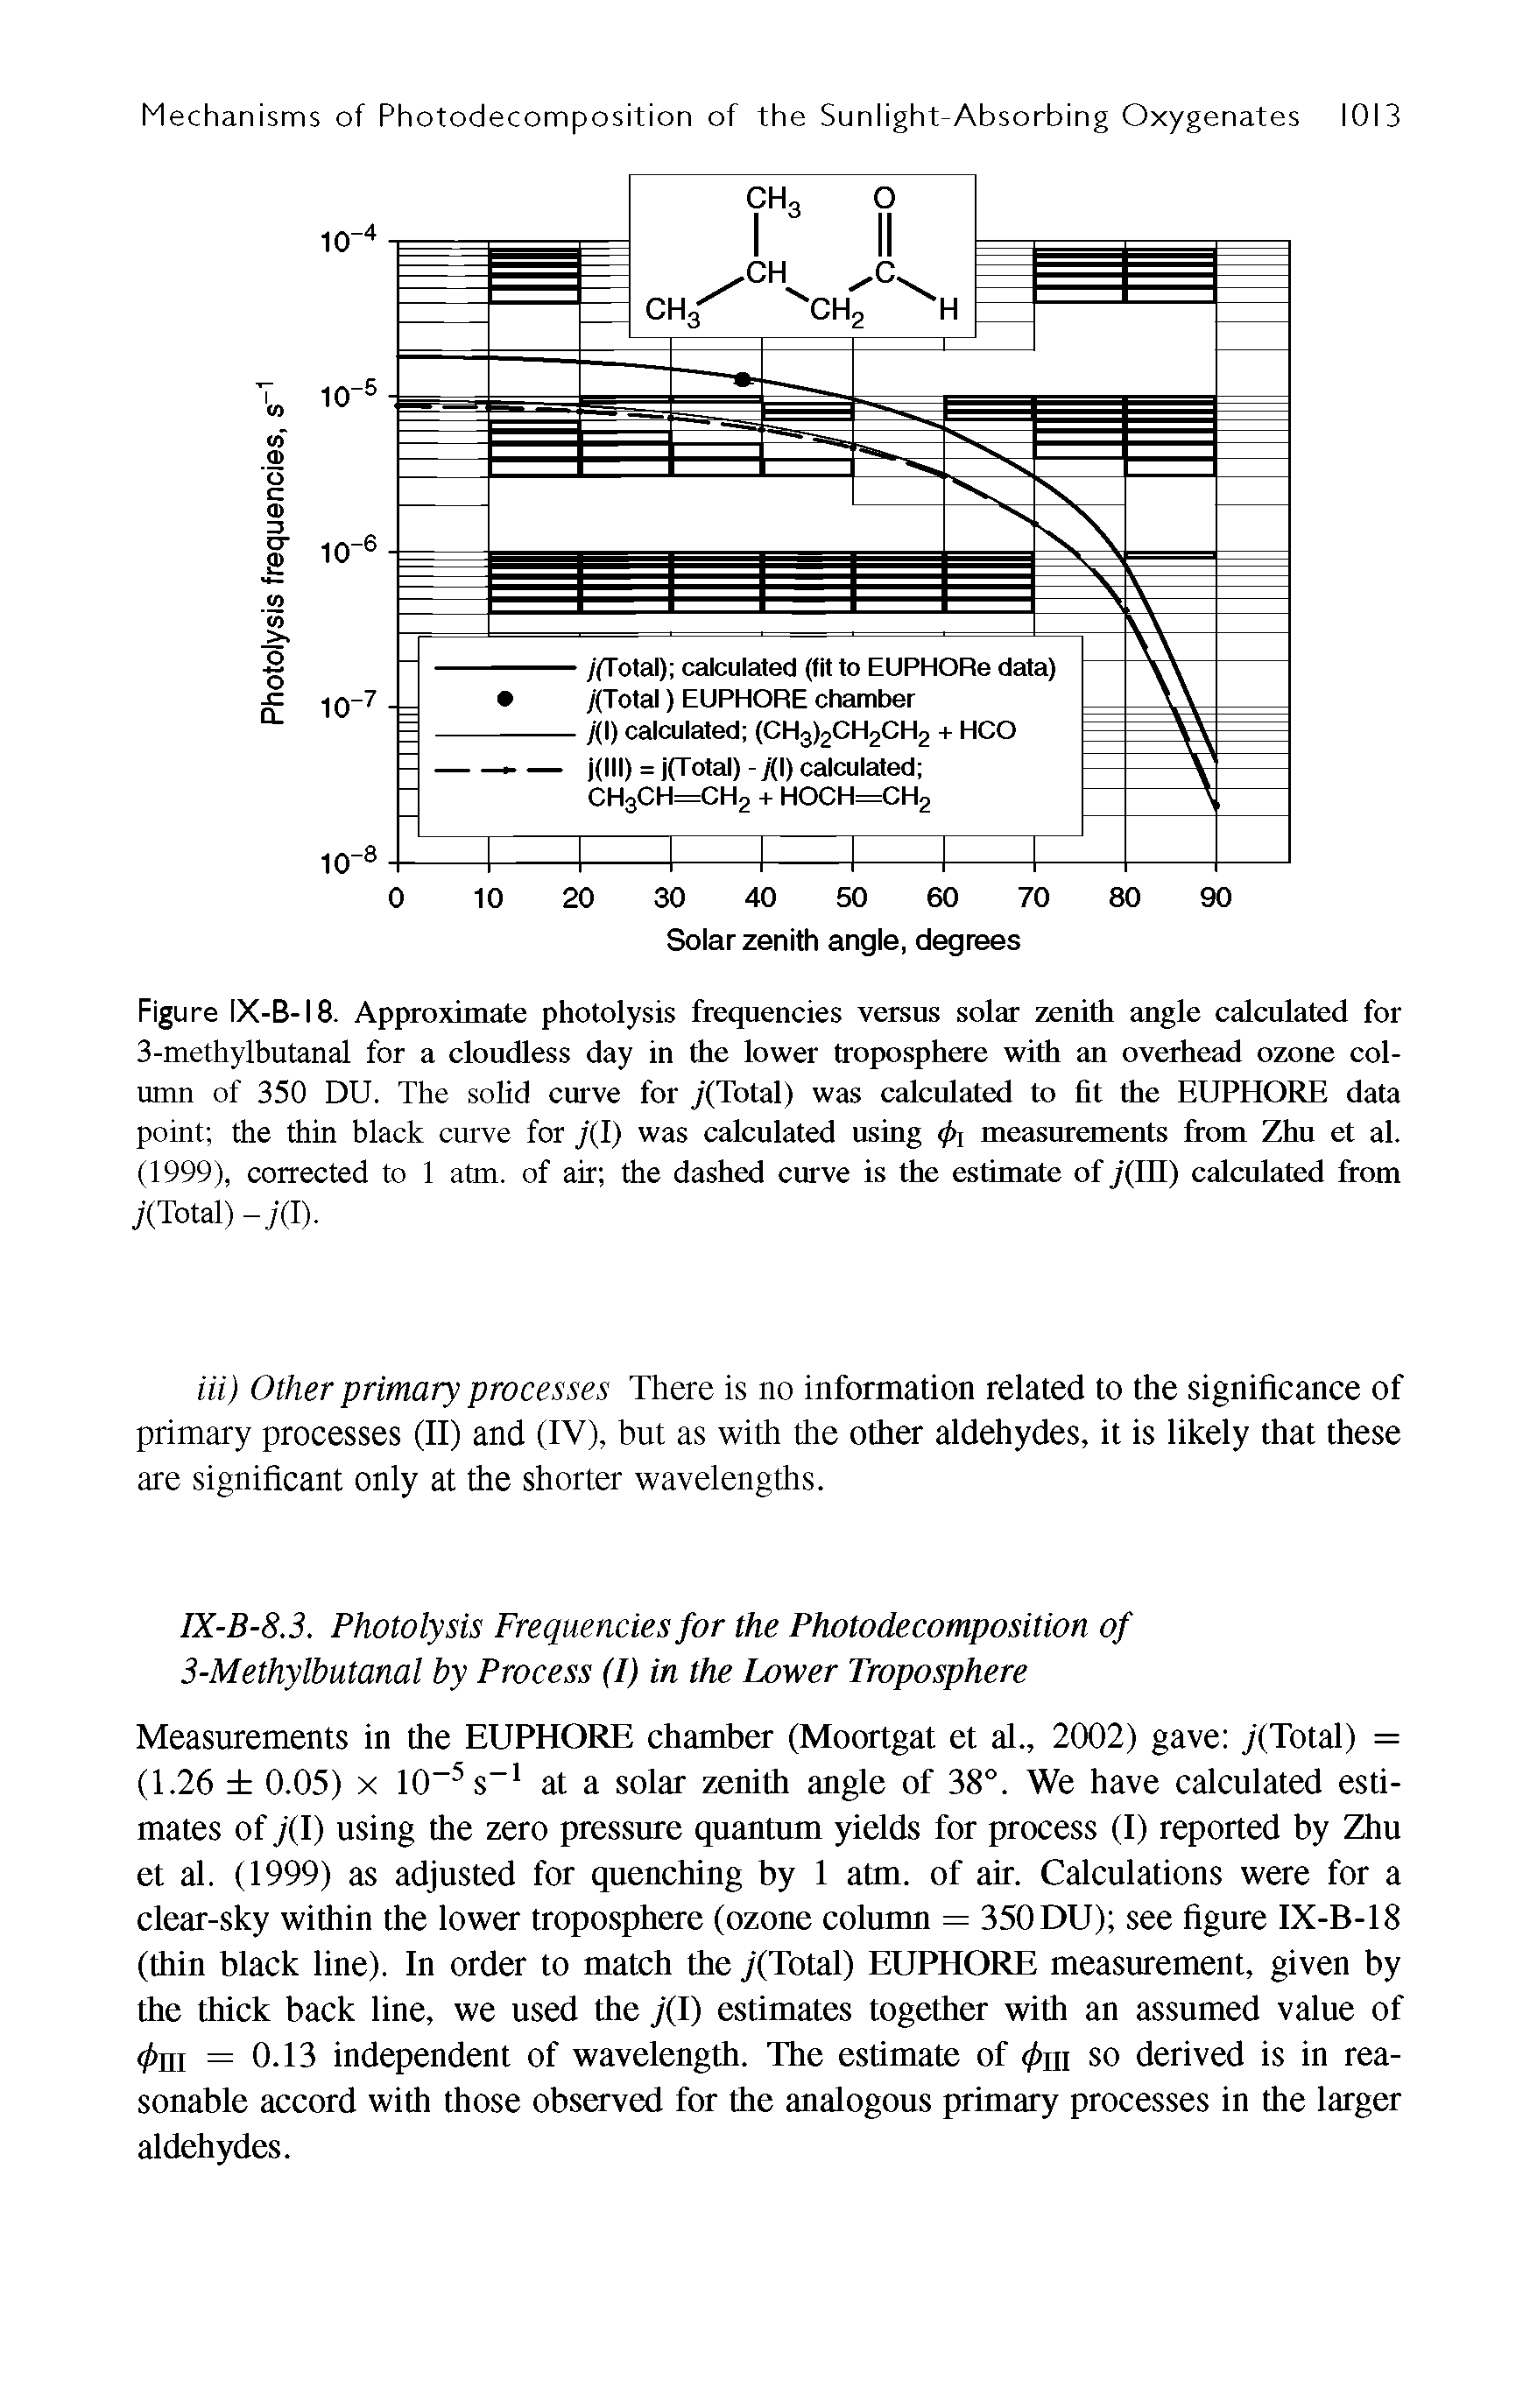 Figure IX-B-18. Approximate photolysis frequencies versus solar zenith angle calculated for 3-methylbutanal for a cloudless day in the lower troposphere with an overhead ozone column of 350 DU. The solid curve for y(Total) was calculated to fit the EUPHORE data point the thin black curve for j l) was calculated using <pi measurements from Zhu et al. (1999), corrected to 1 atm. of air the dashed curve is the estimate of J(ni) calculated from (Total)...